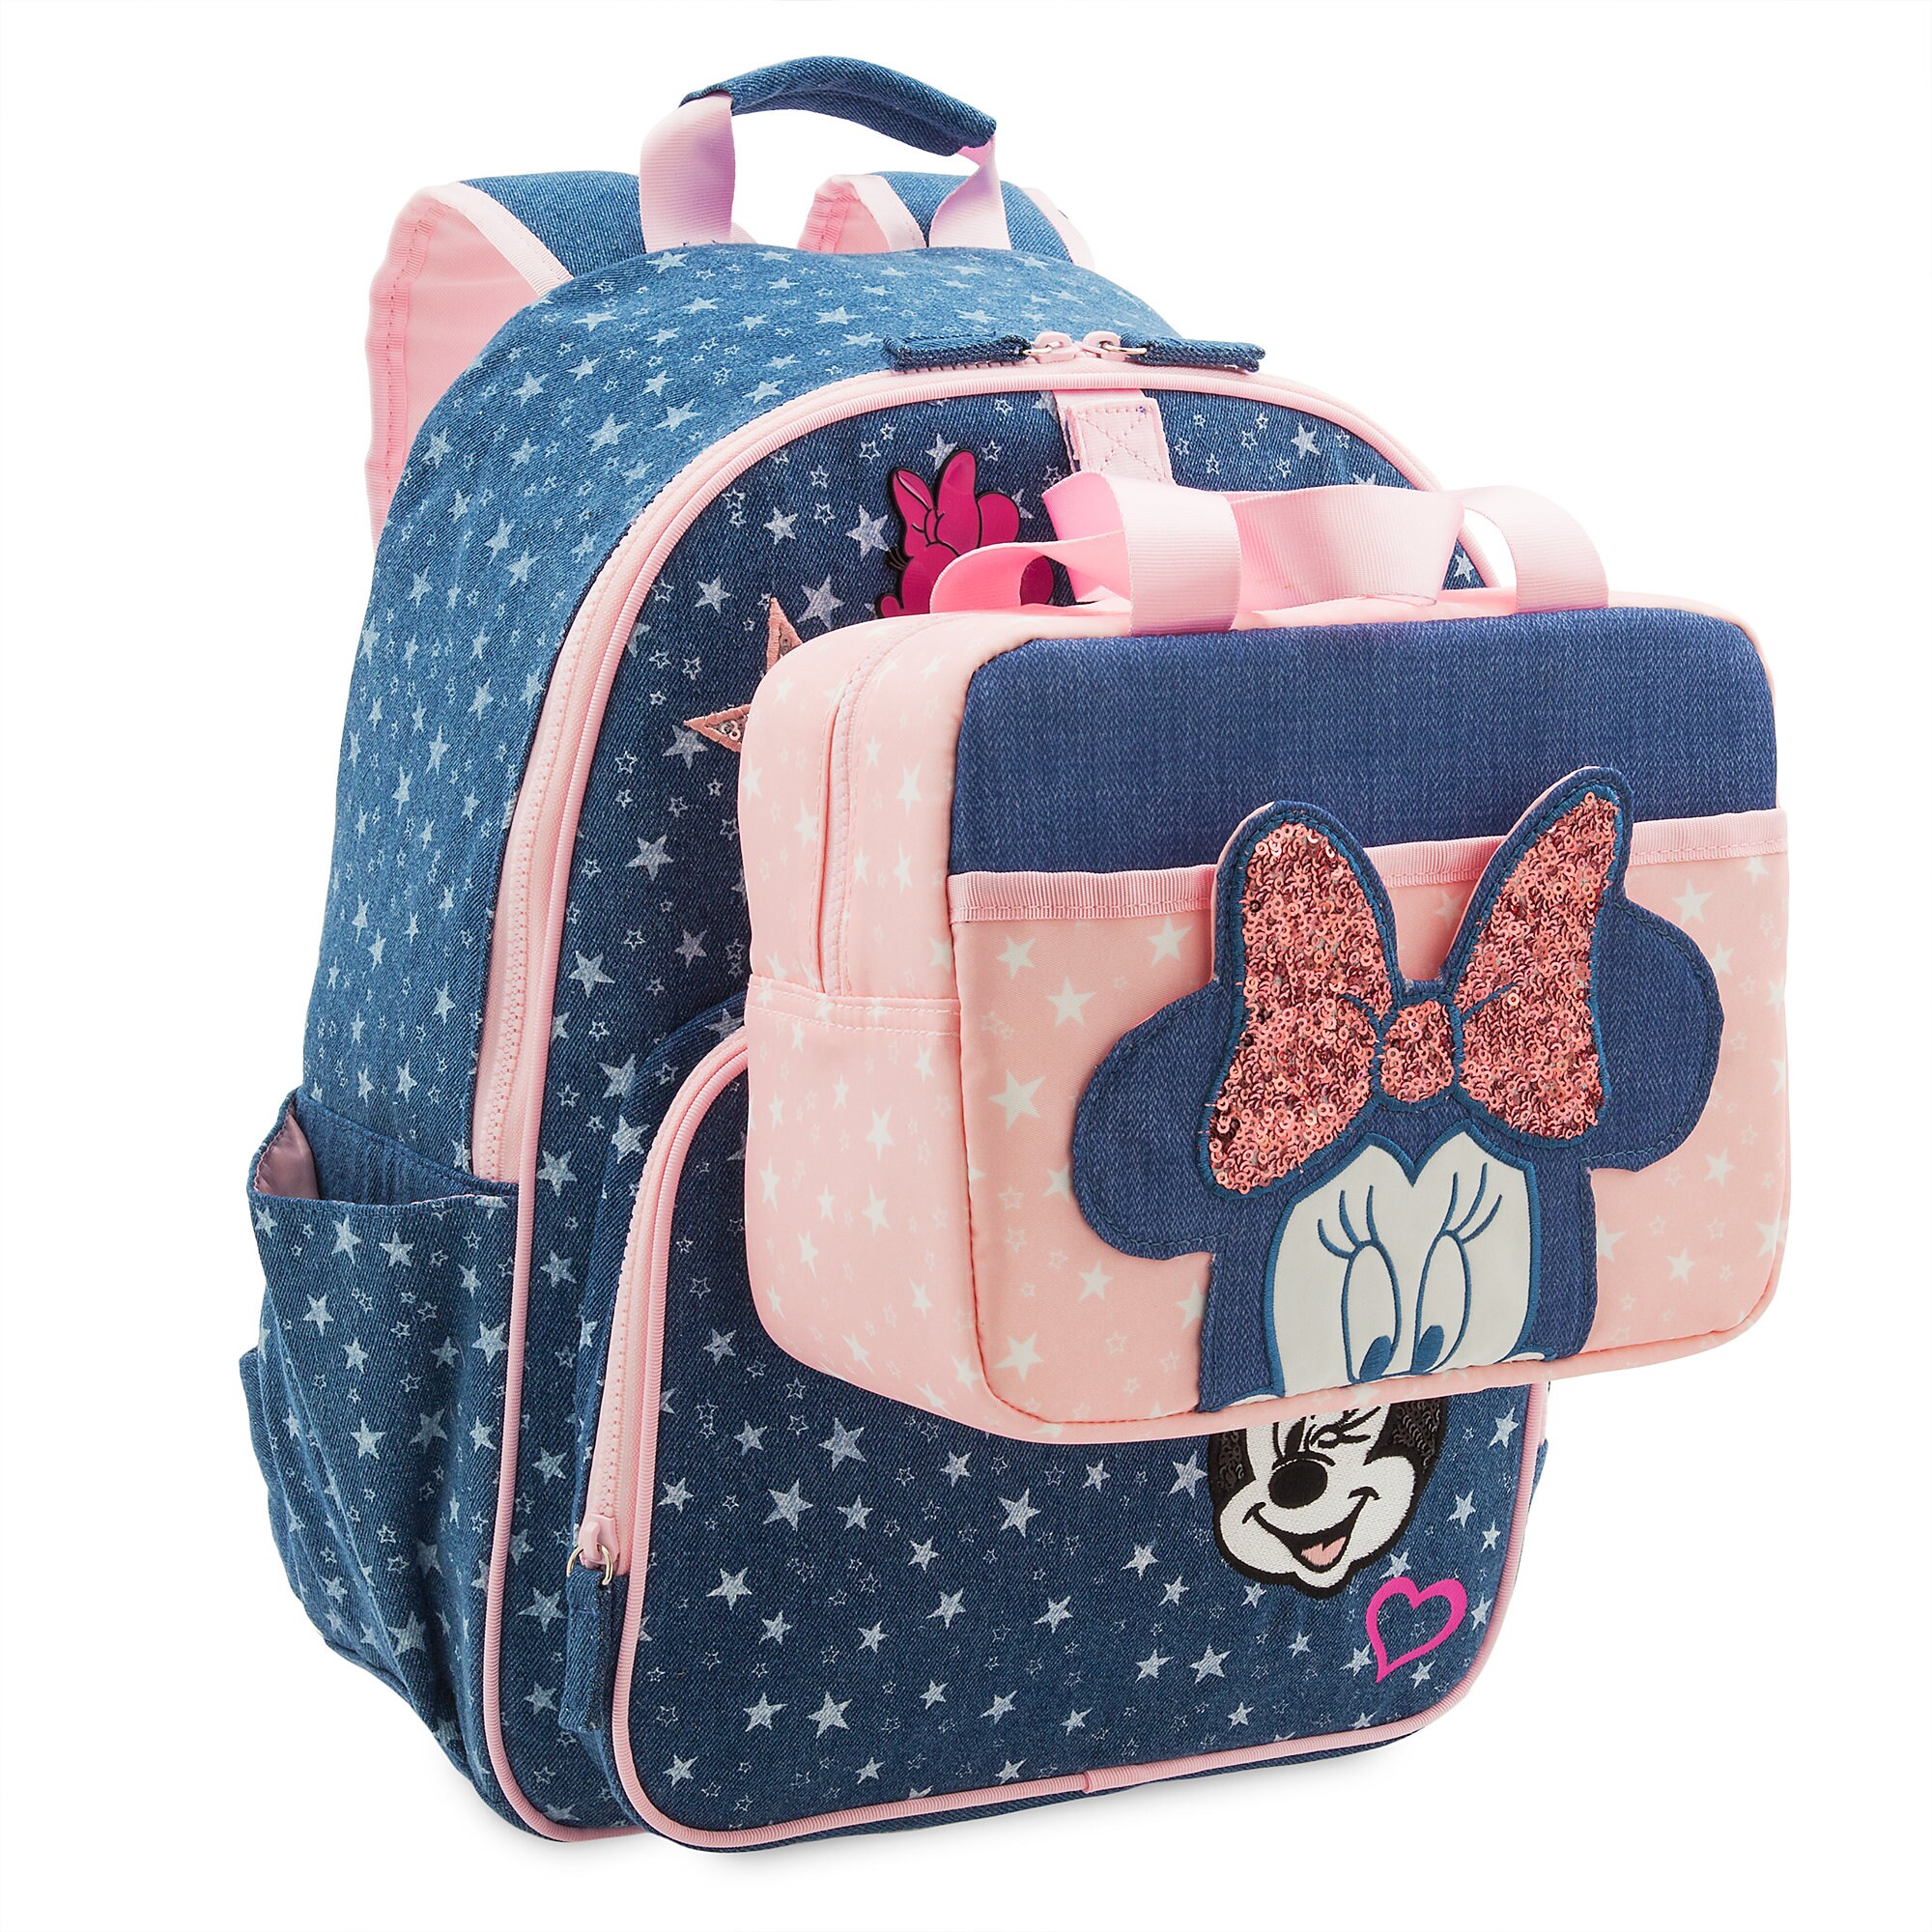 Minnie Mouse Denim Backpack for Kids - Personalized